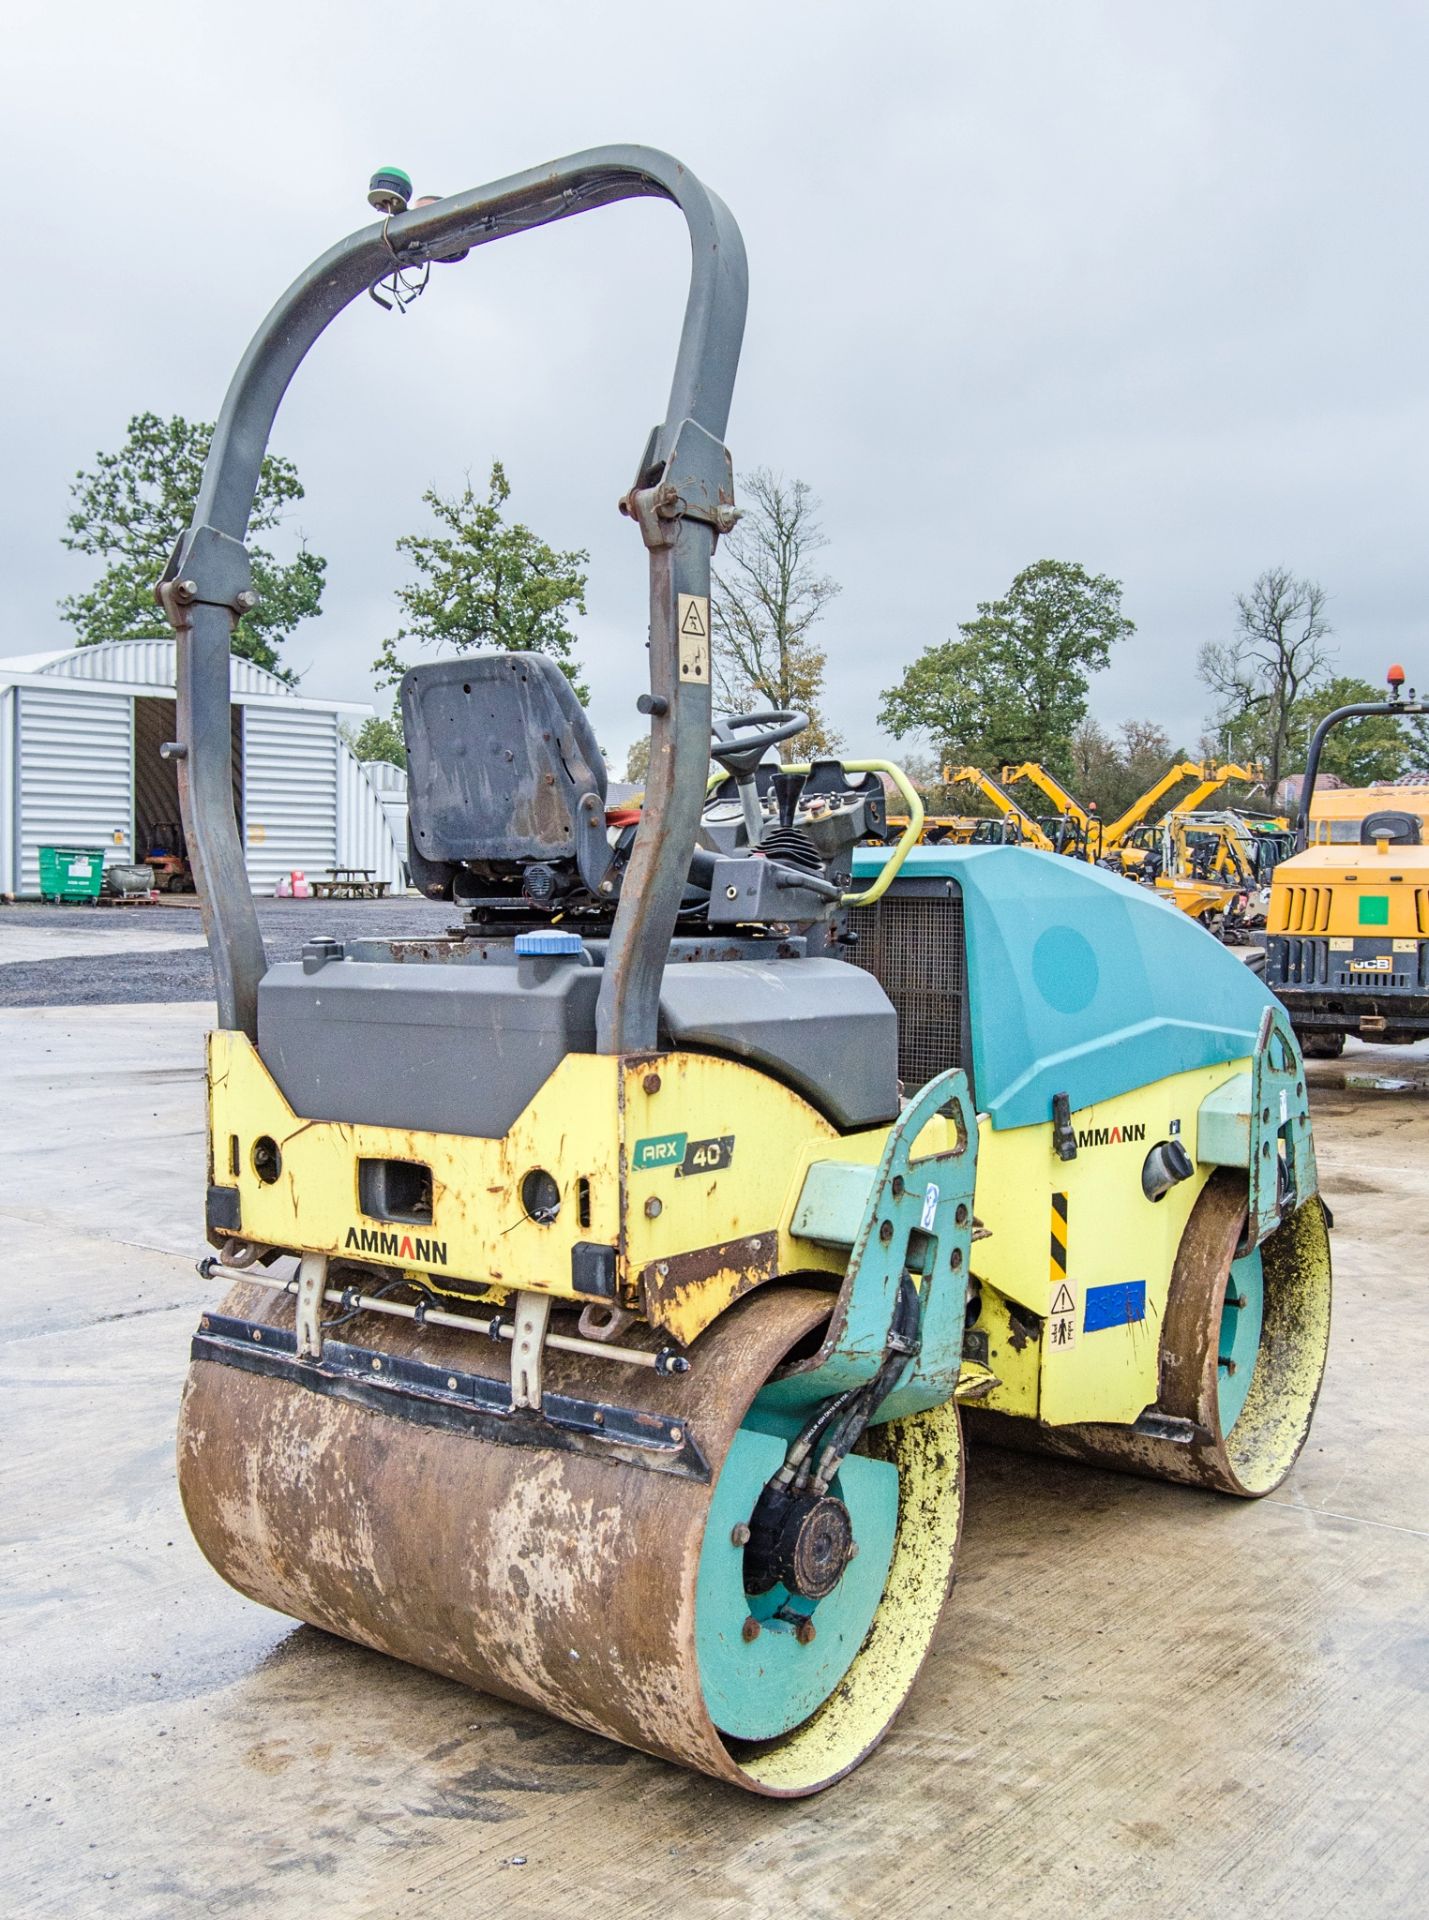 Ammann ARX40 tandem axle ride on roller Year: 2013 S/N: 40127 Recorded Hours: Not displayed (Clock - Image 3 of 18